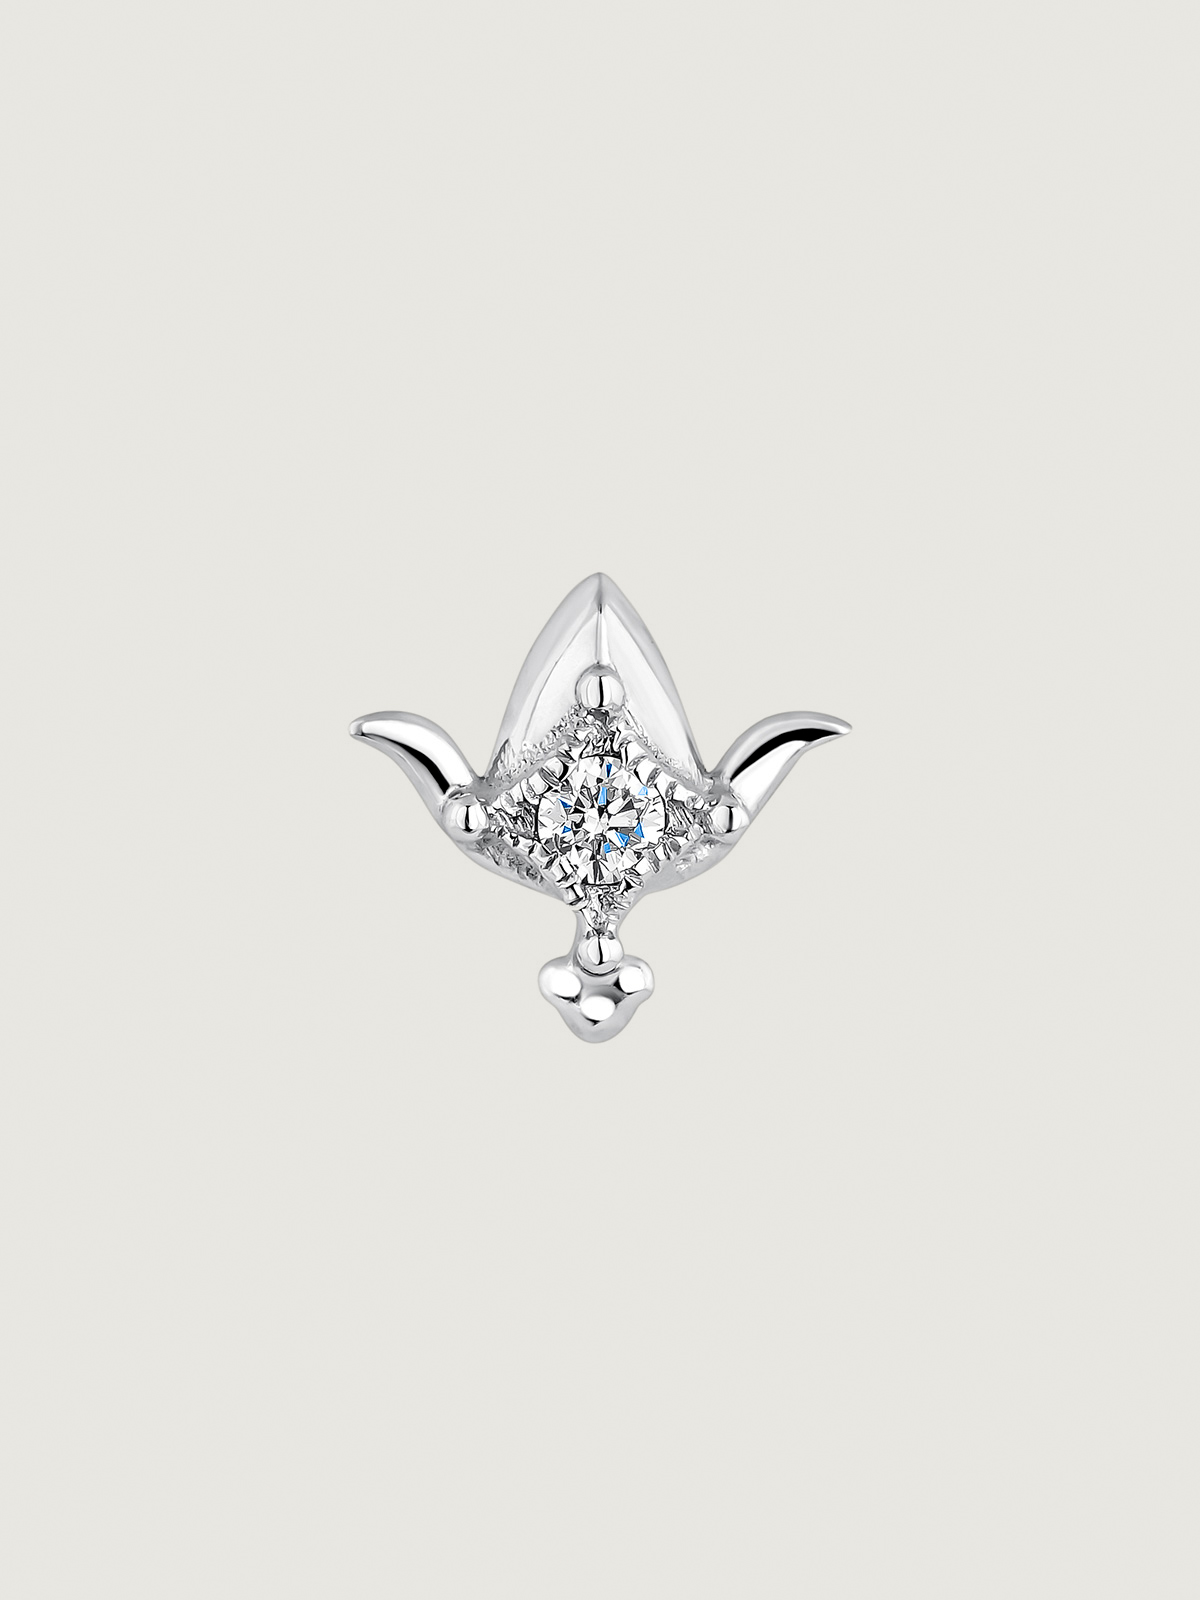 Individual 9K white gold earring with lotus flower shaped diamonds